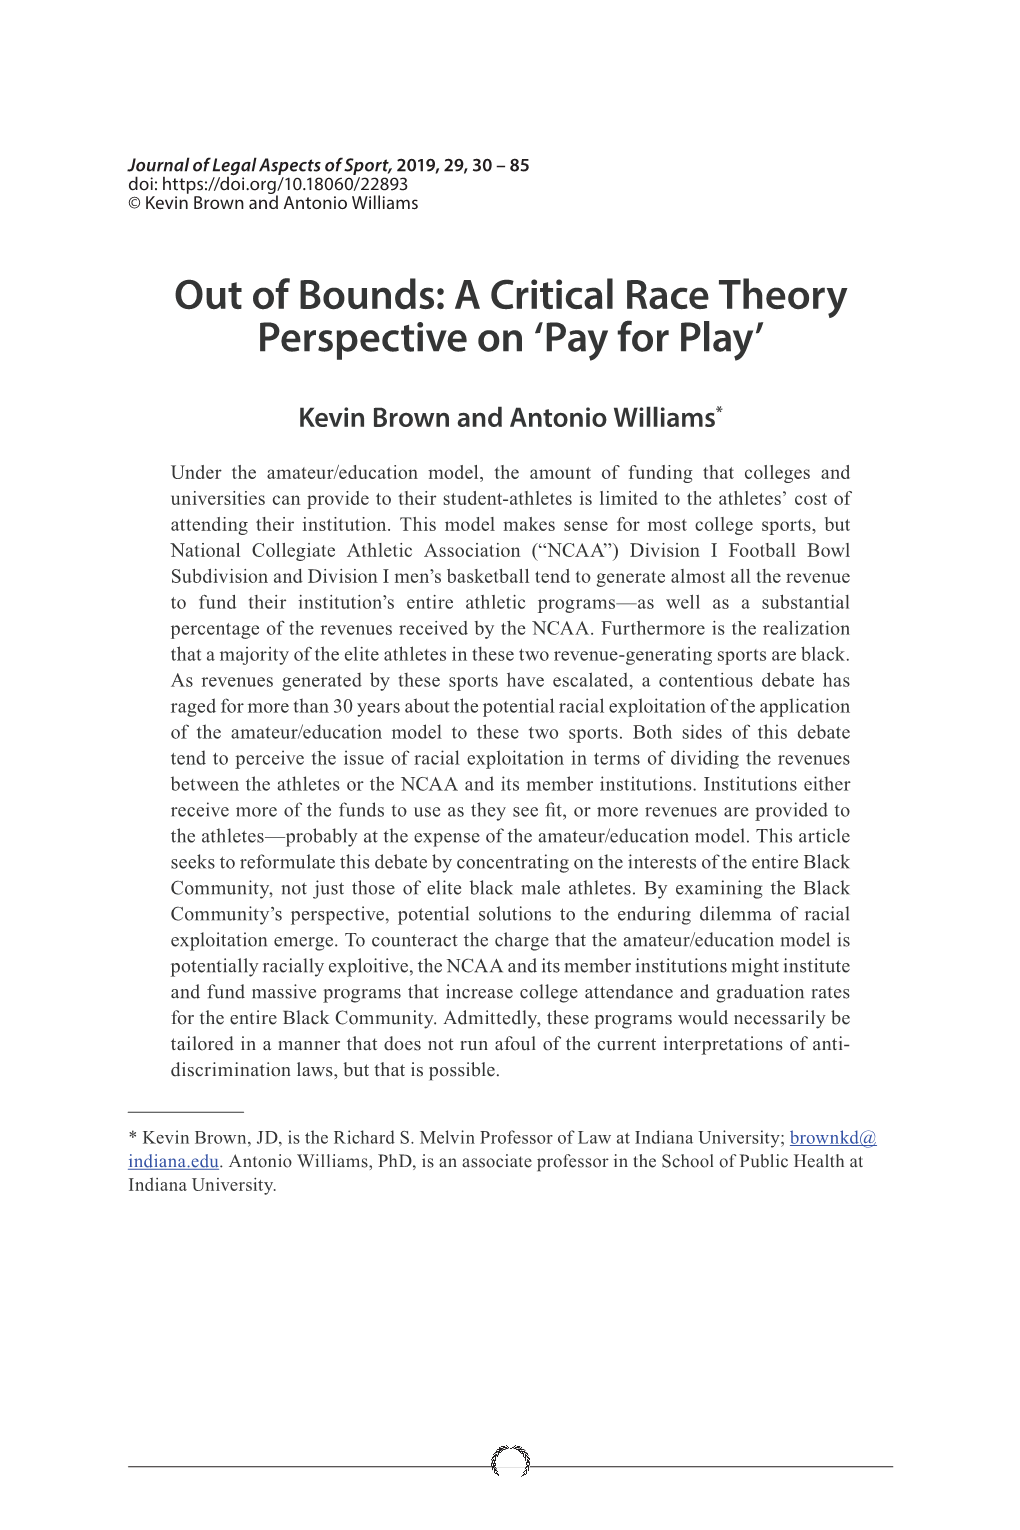 Out of Bounds: a Critical Race Theory Perspective on 'Pay for Play'